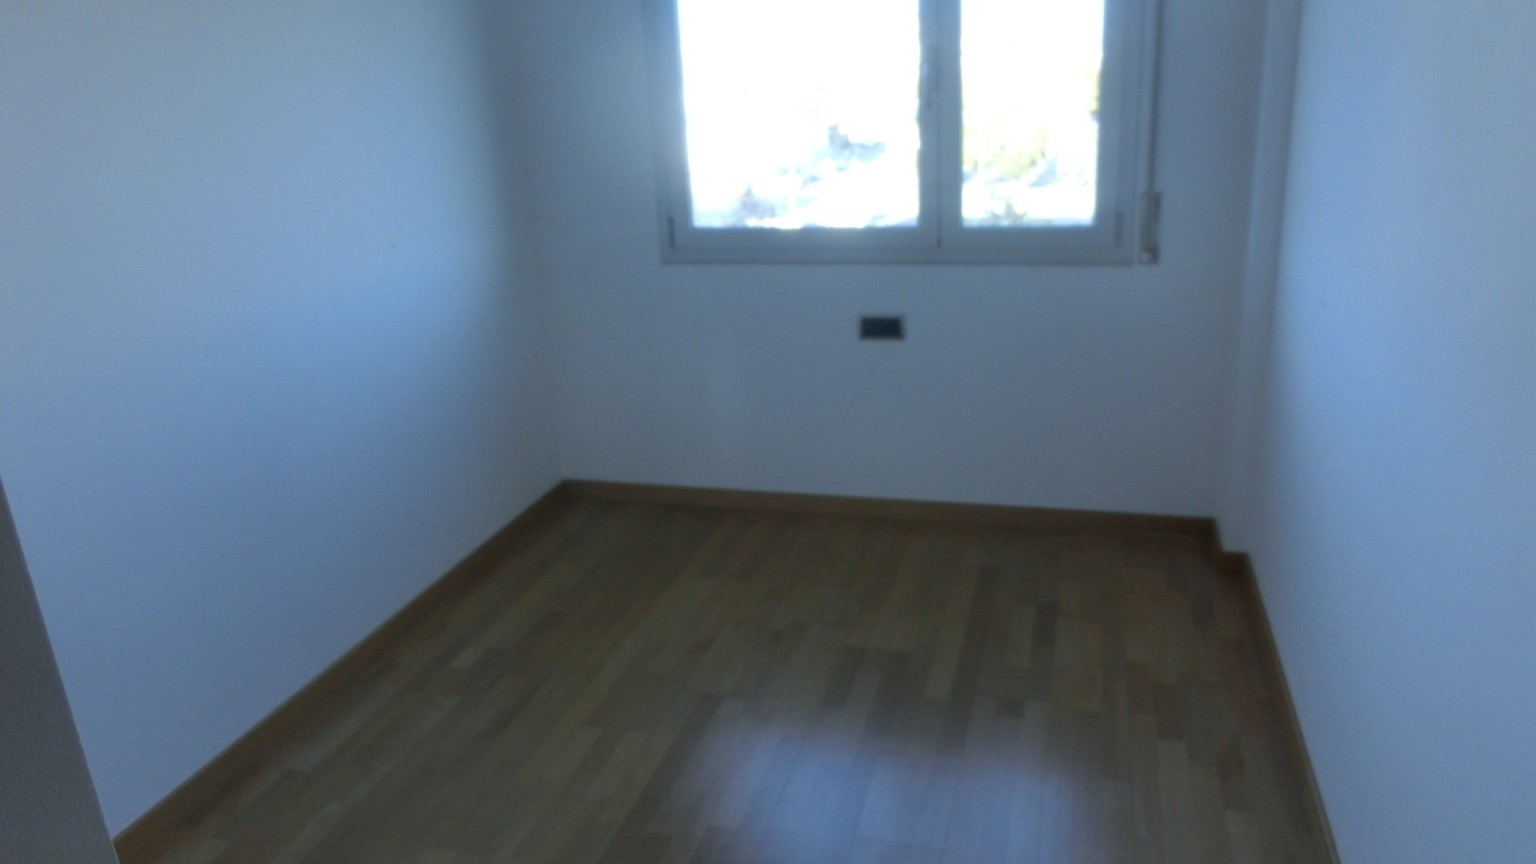 Flat for sale with 3 bedrooms, including parking and storage room.